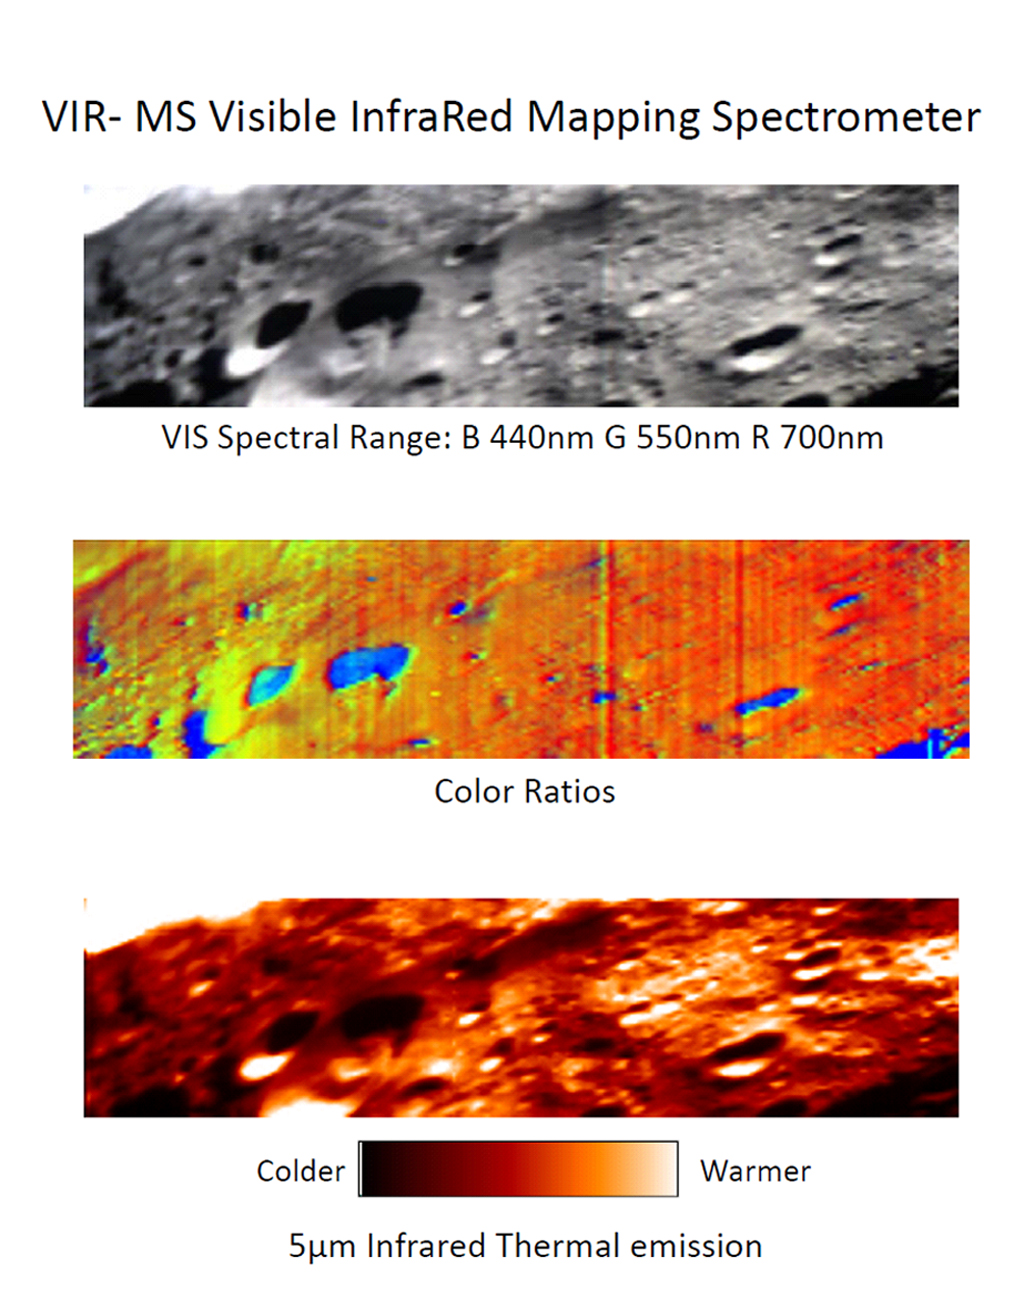 Visible and Infrared Mapping Spectrometer False-Color Image